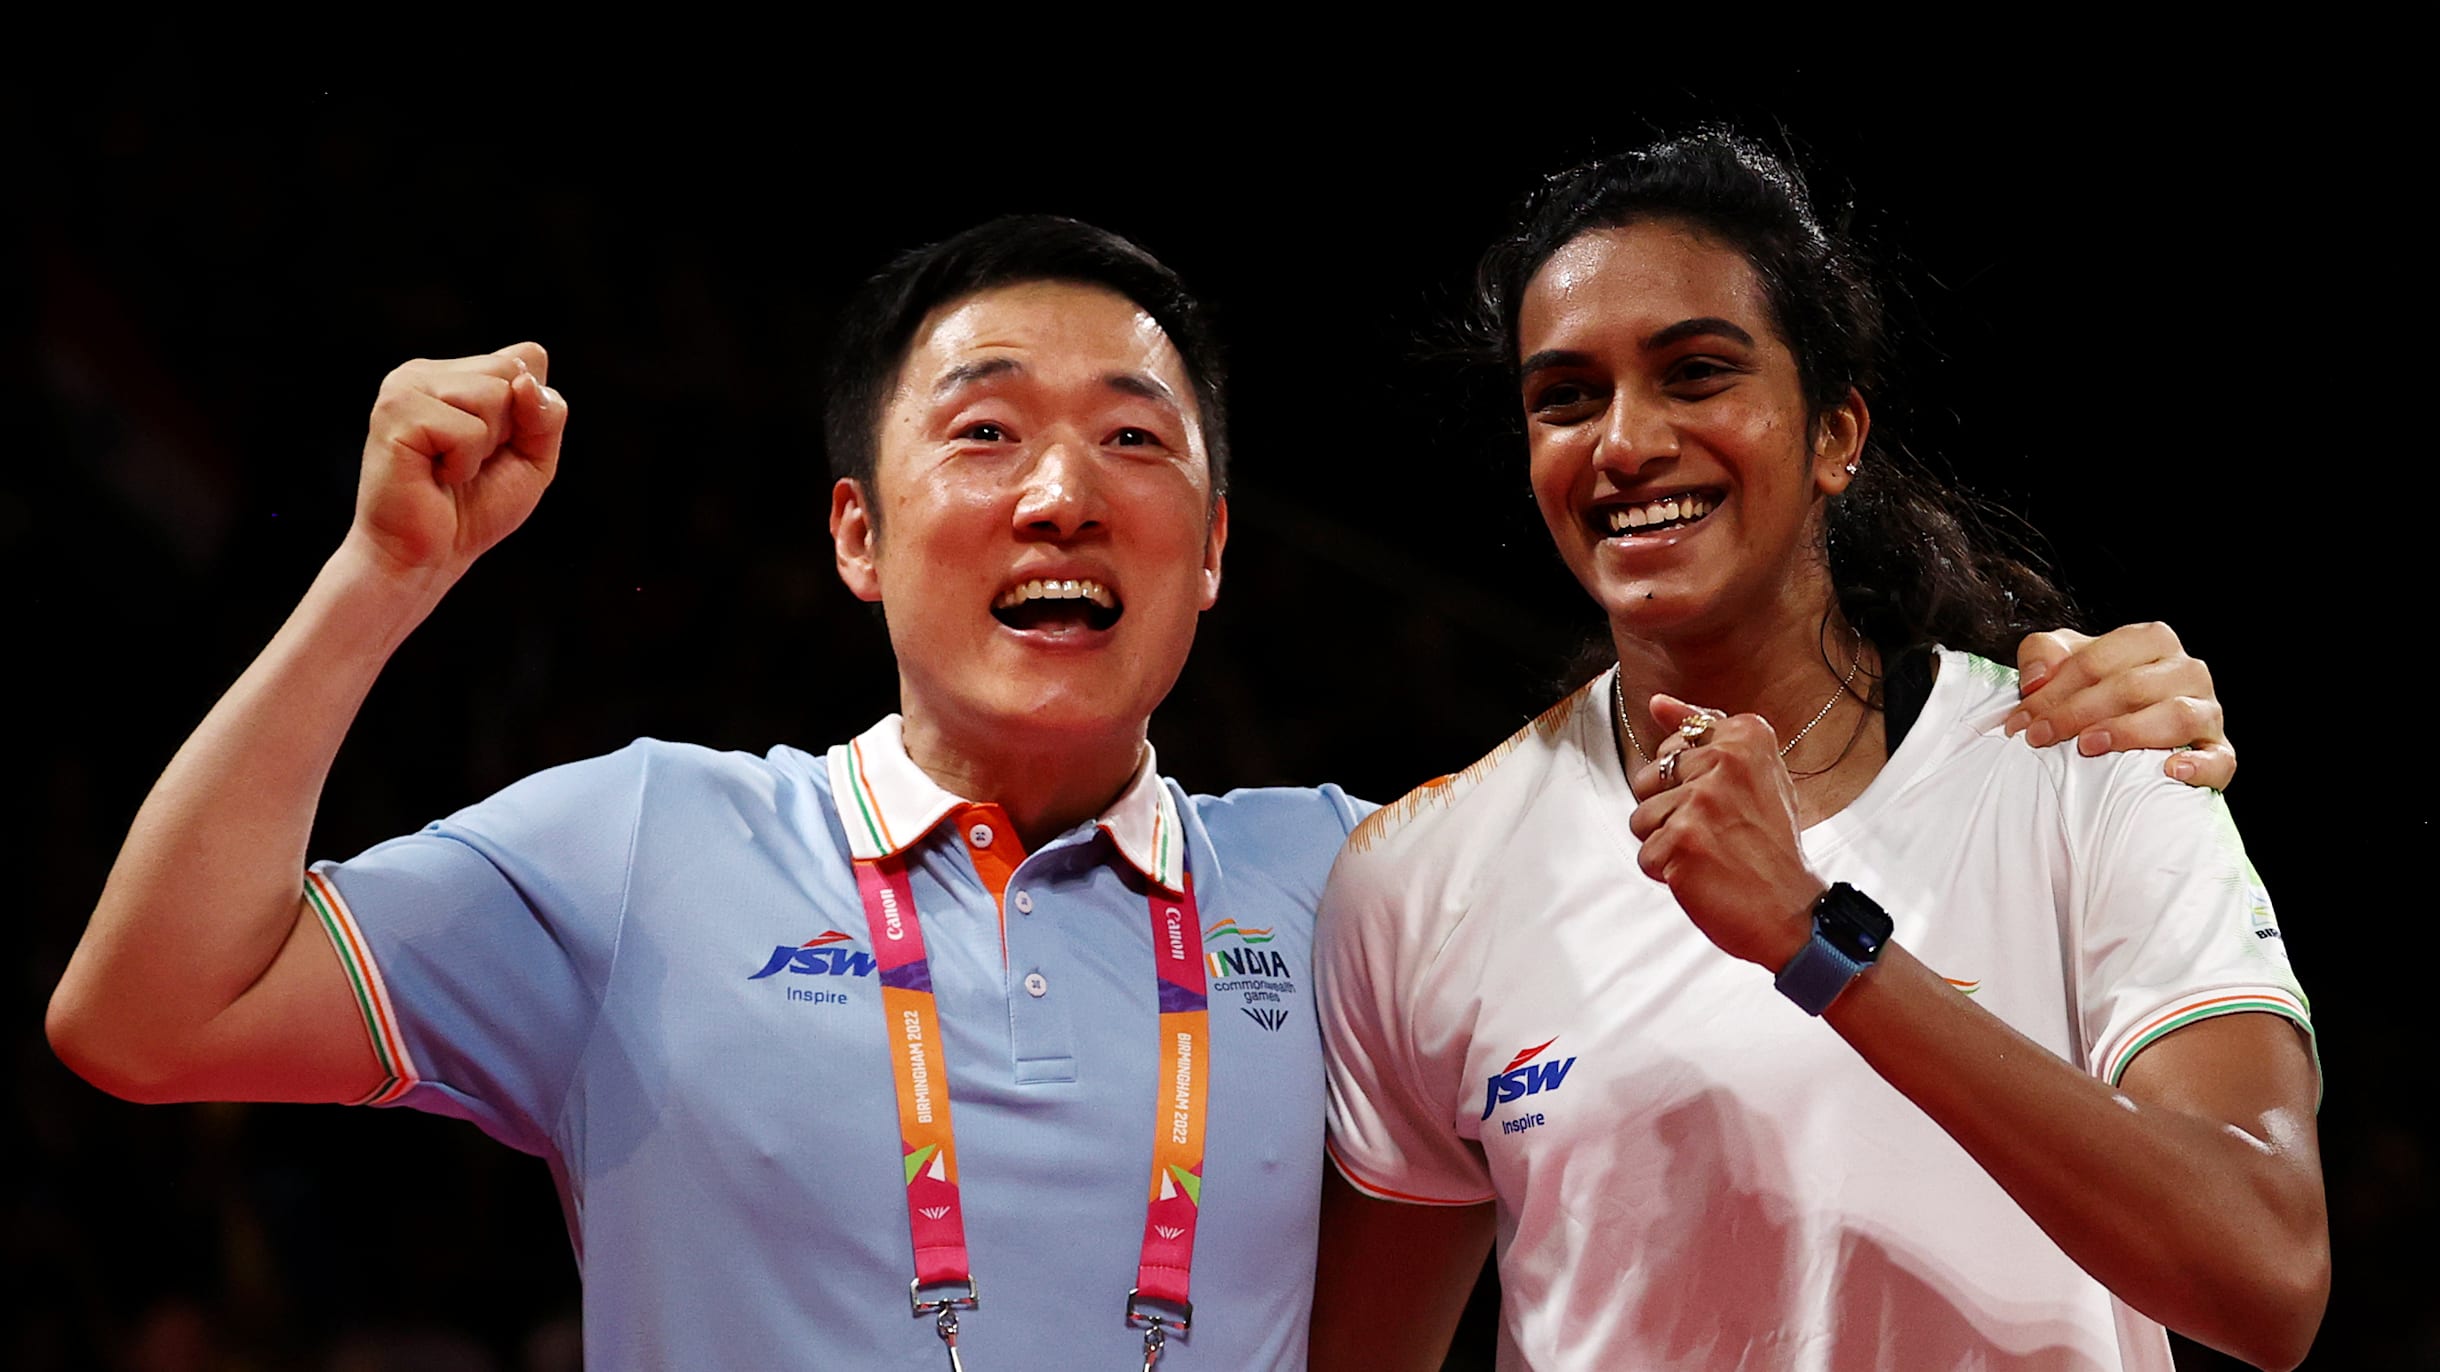 PV Sindhu parts ways with coach Park Tae-Sang